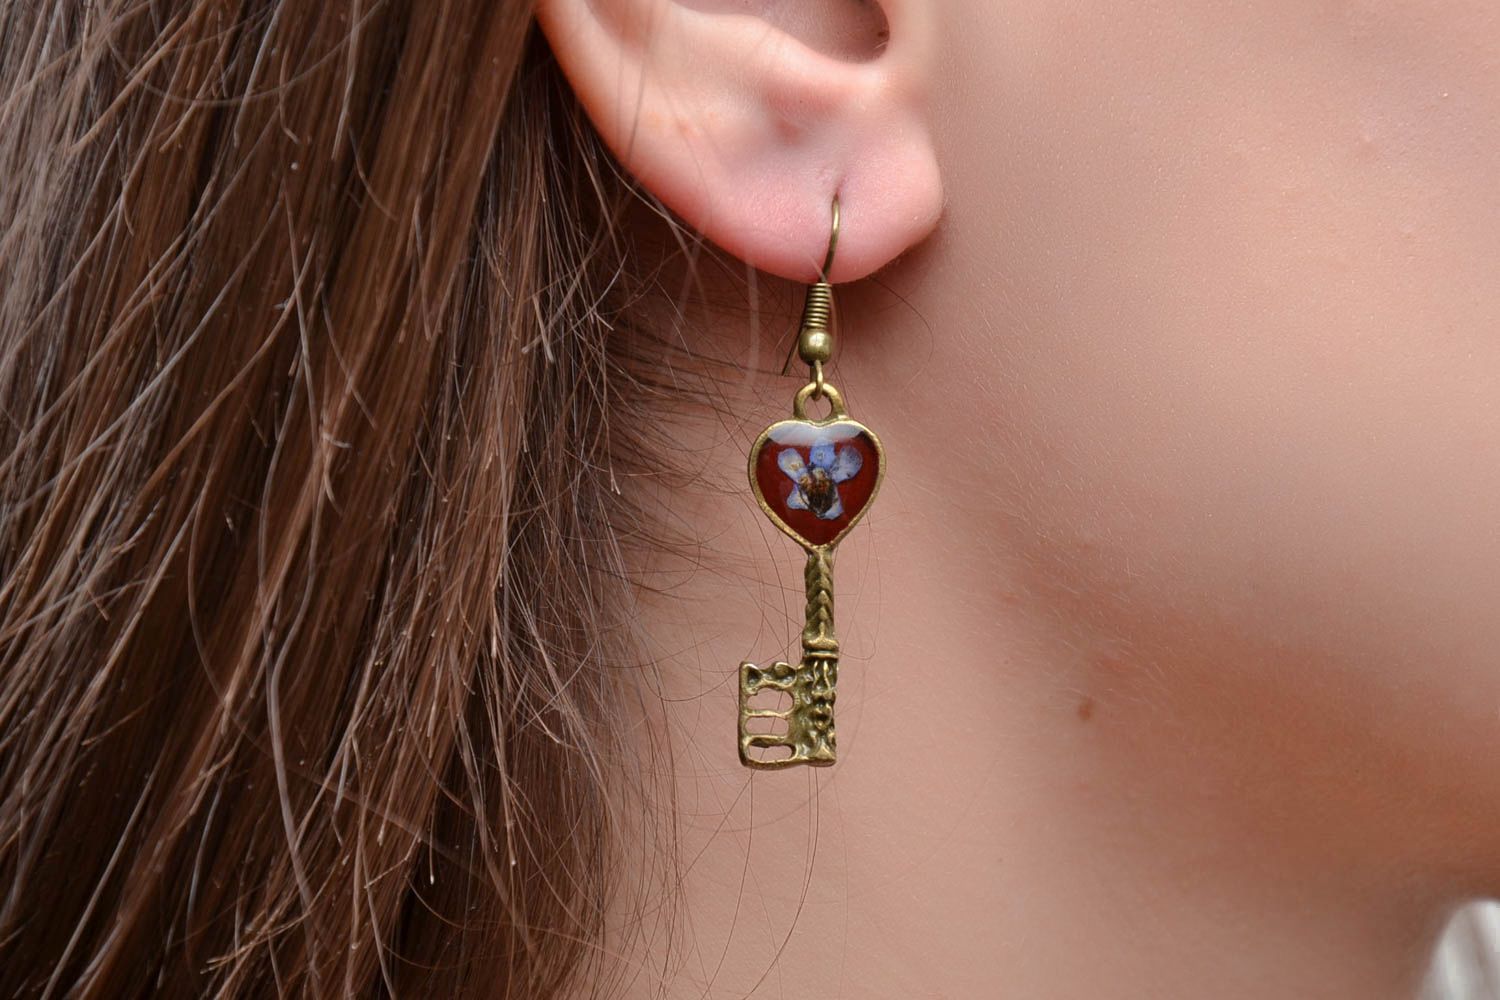 Key-shaped earrings with natural flowers photo 2